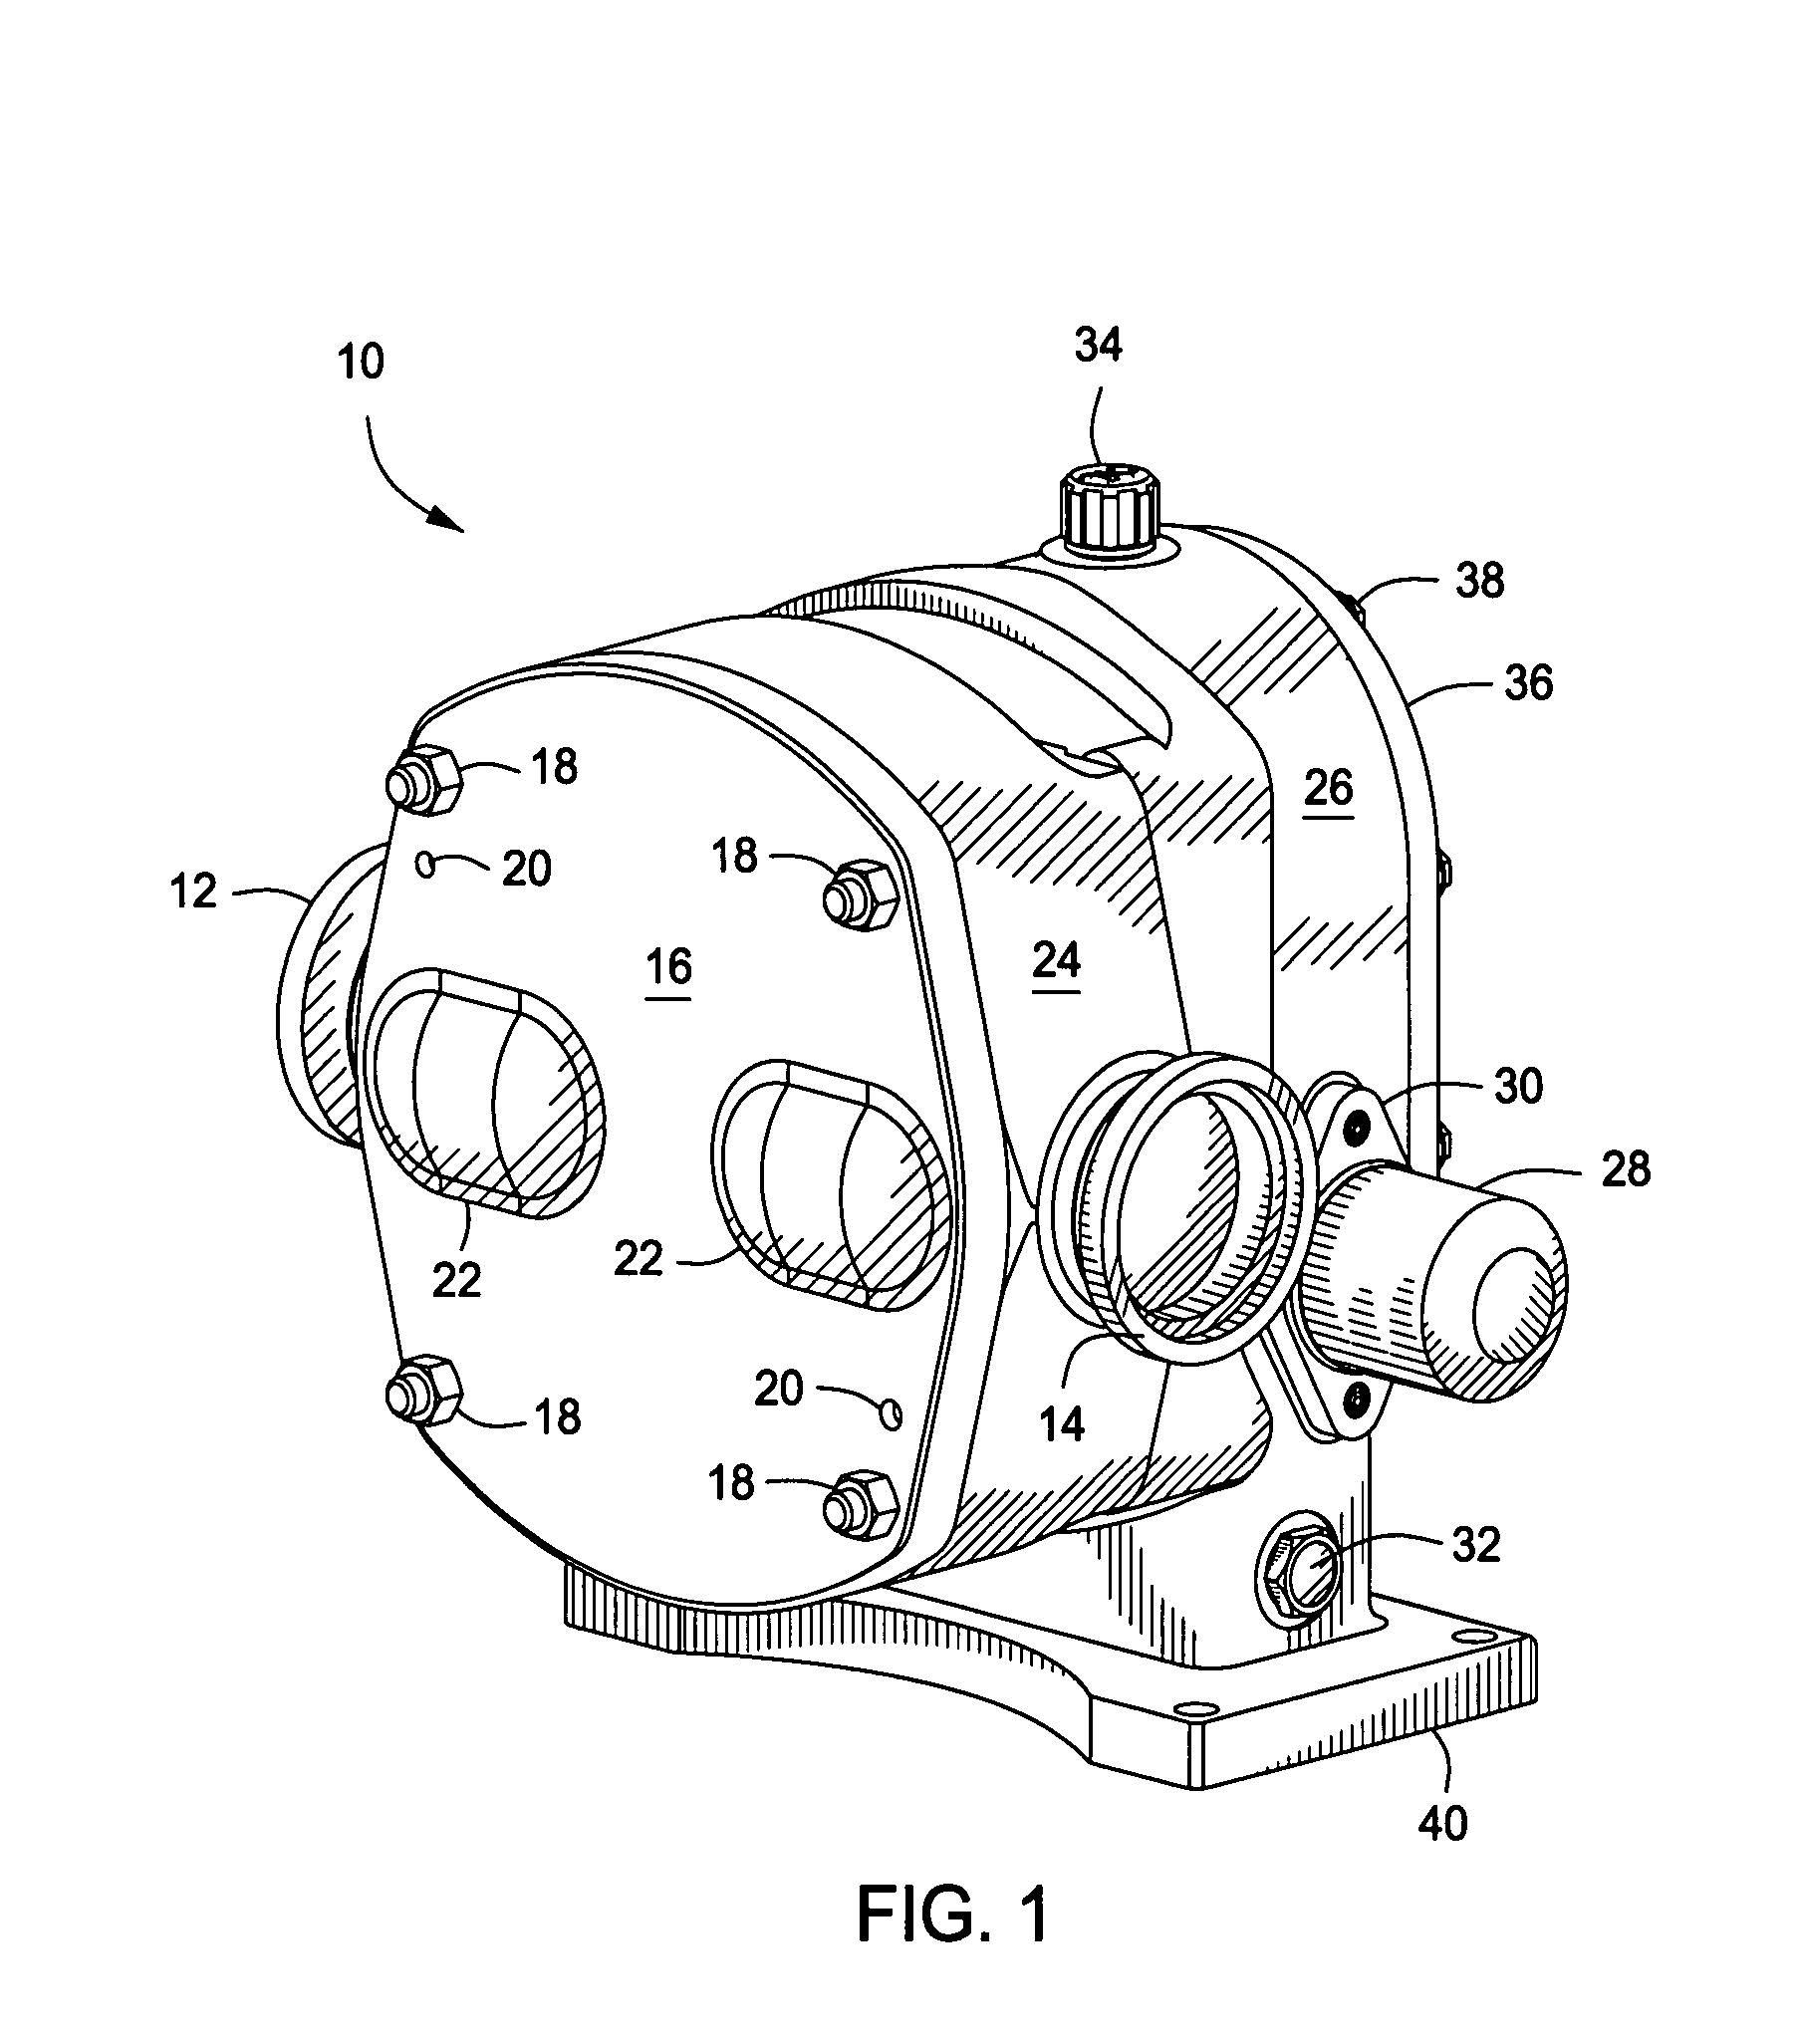 Positive displacement pump apparatus and method